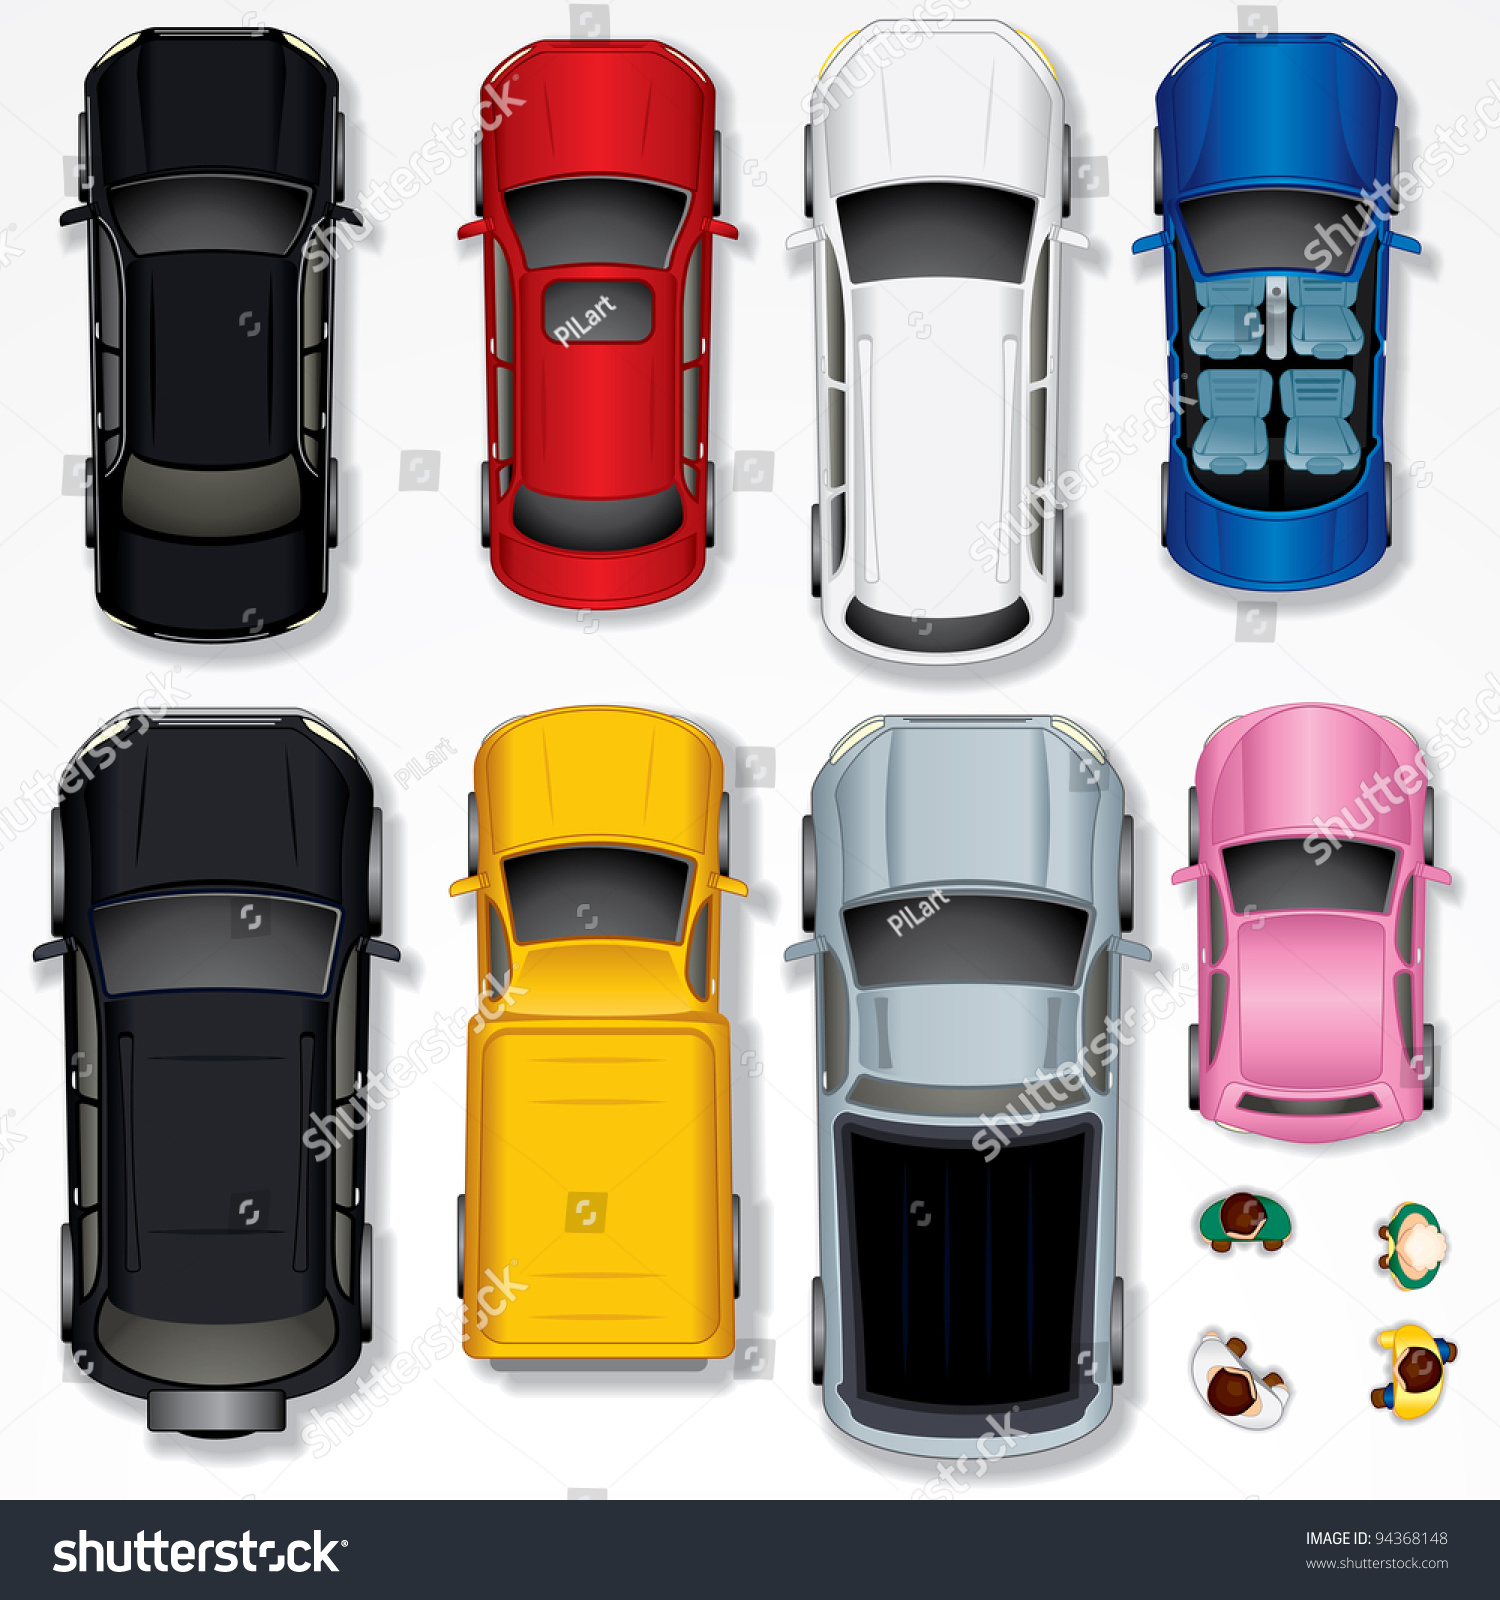 download clipart car top view - photo #32